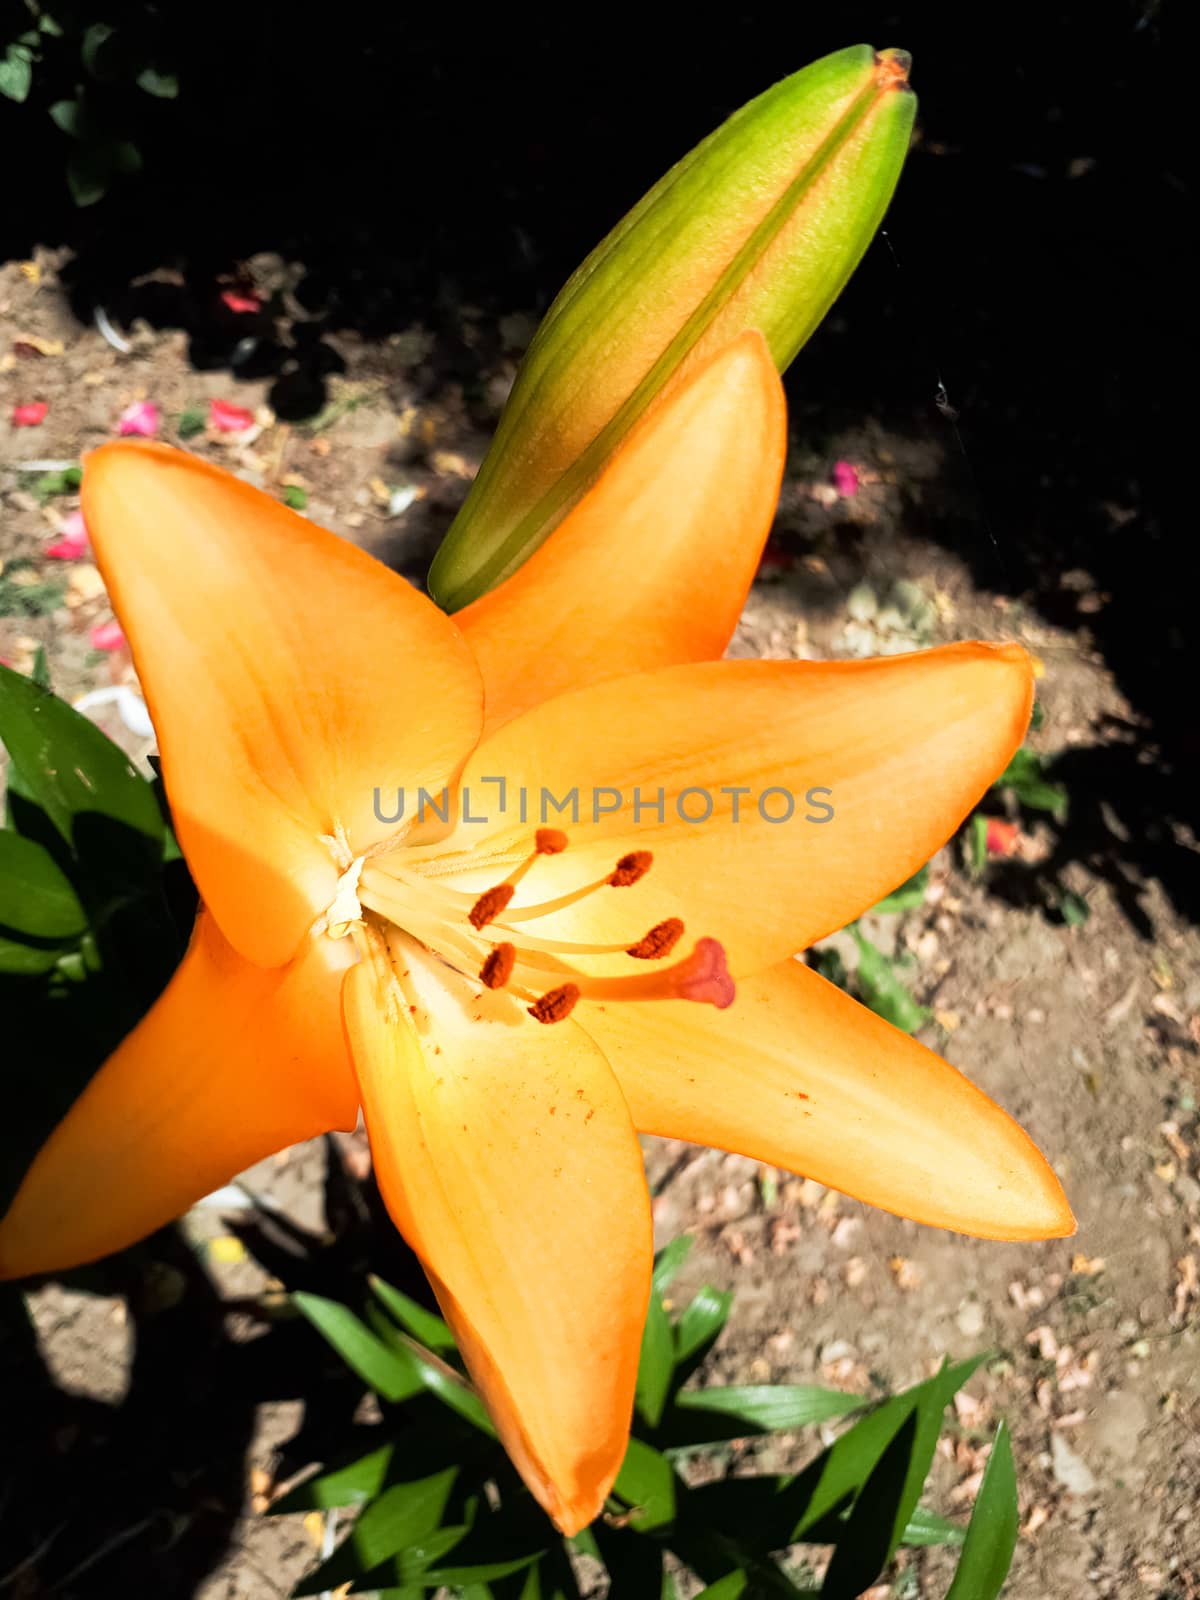 Flowers of yellow lilies on the flowerbed. lily blossoms.